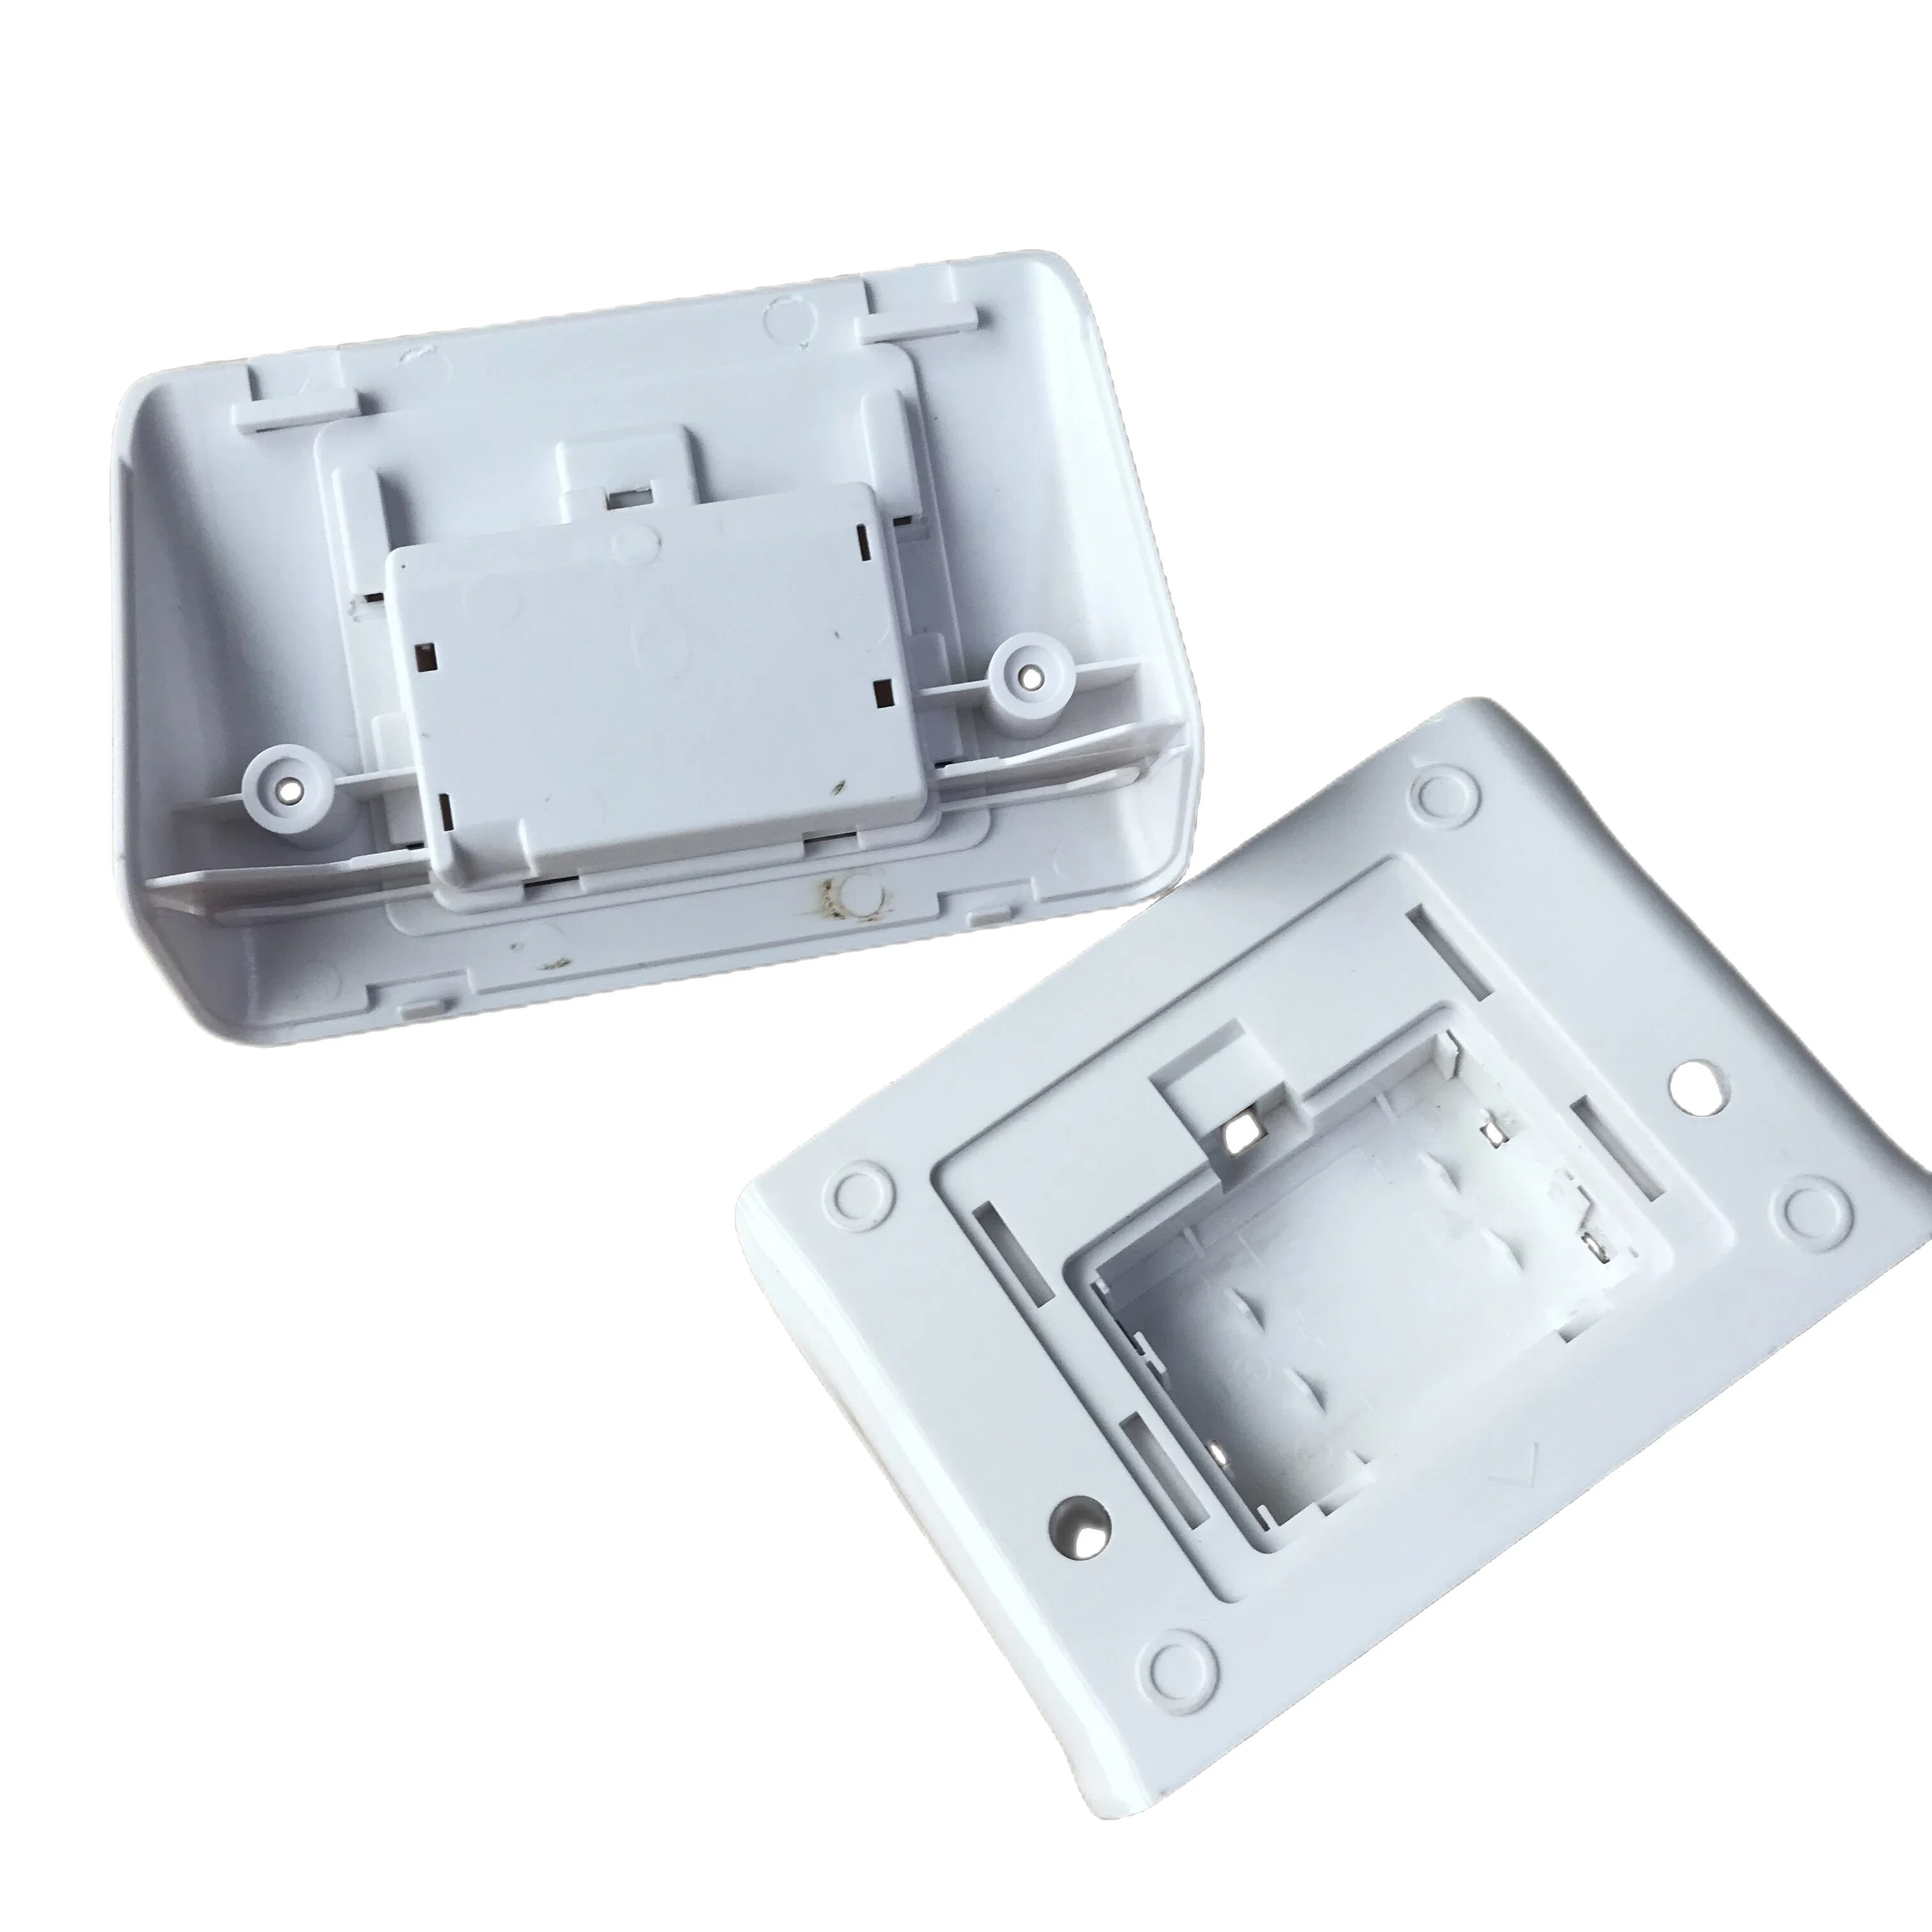 Custom Plastic Injection Molding ABS Plastic Housing Components for Industrial Equipment